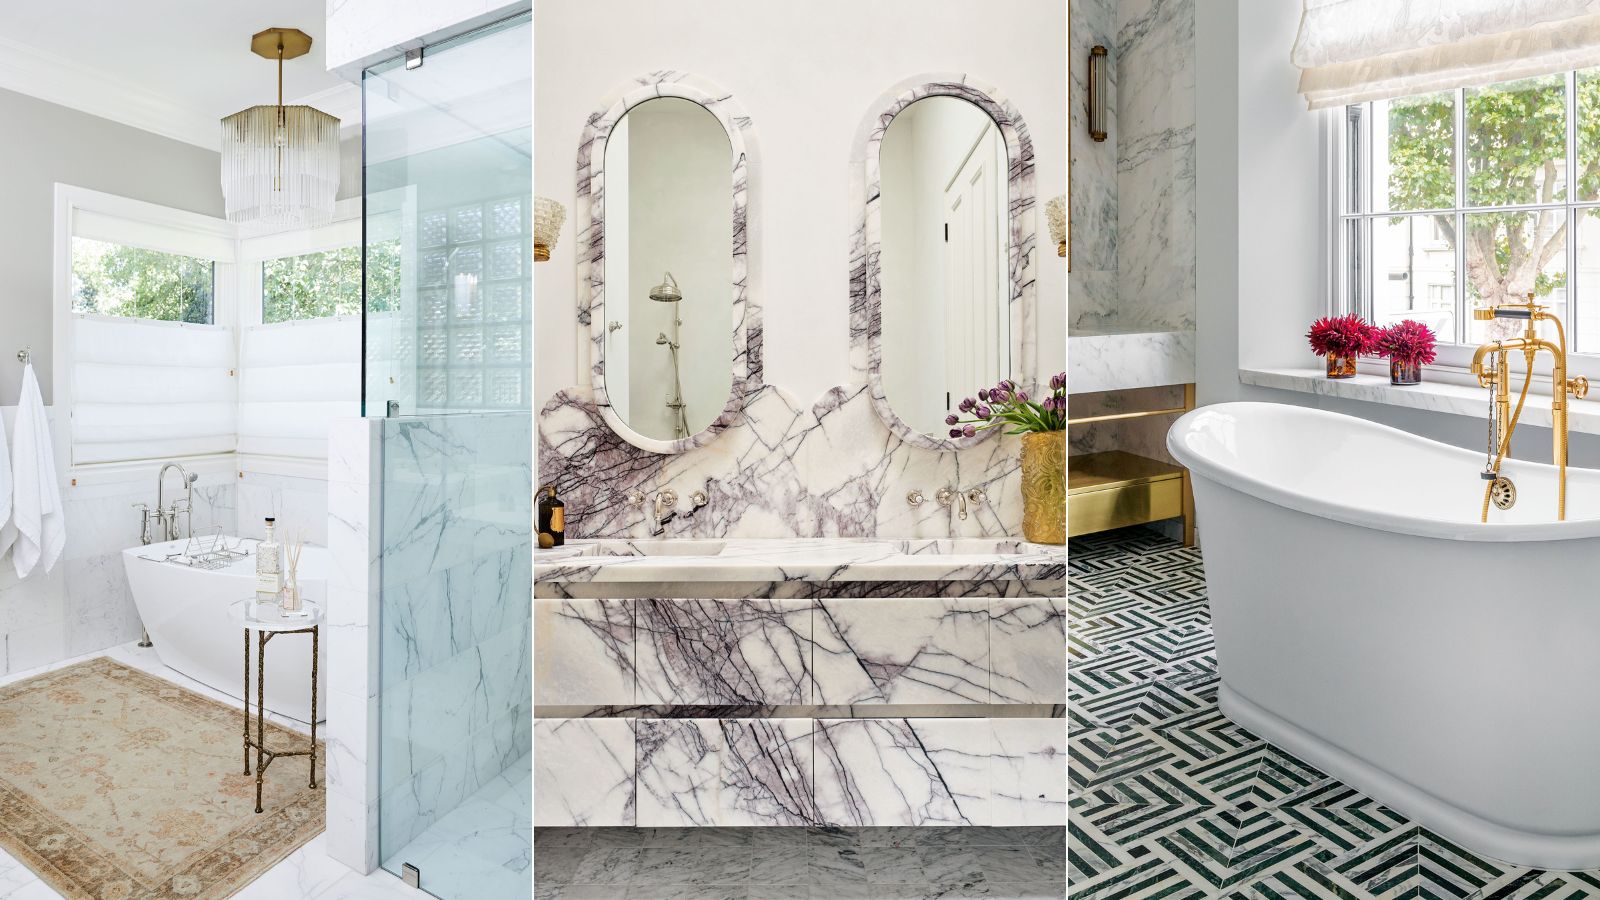 Find How to Make Your Bathroom Look Expensive